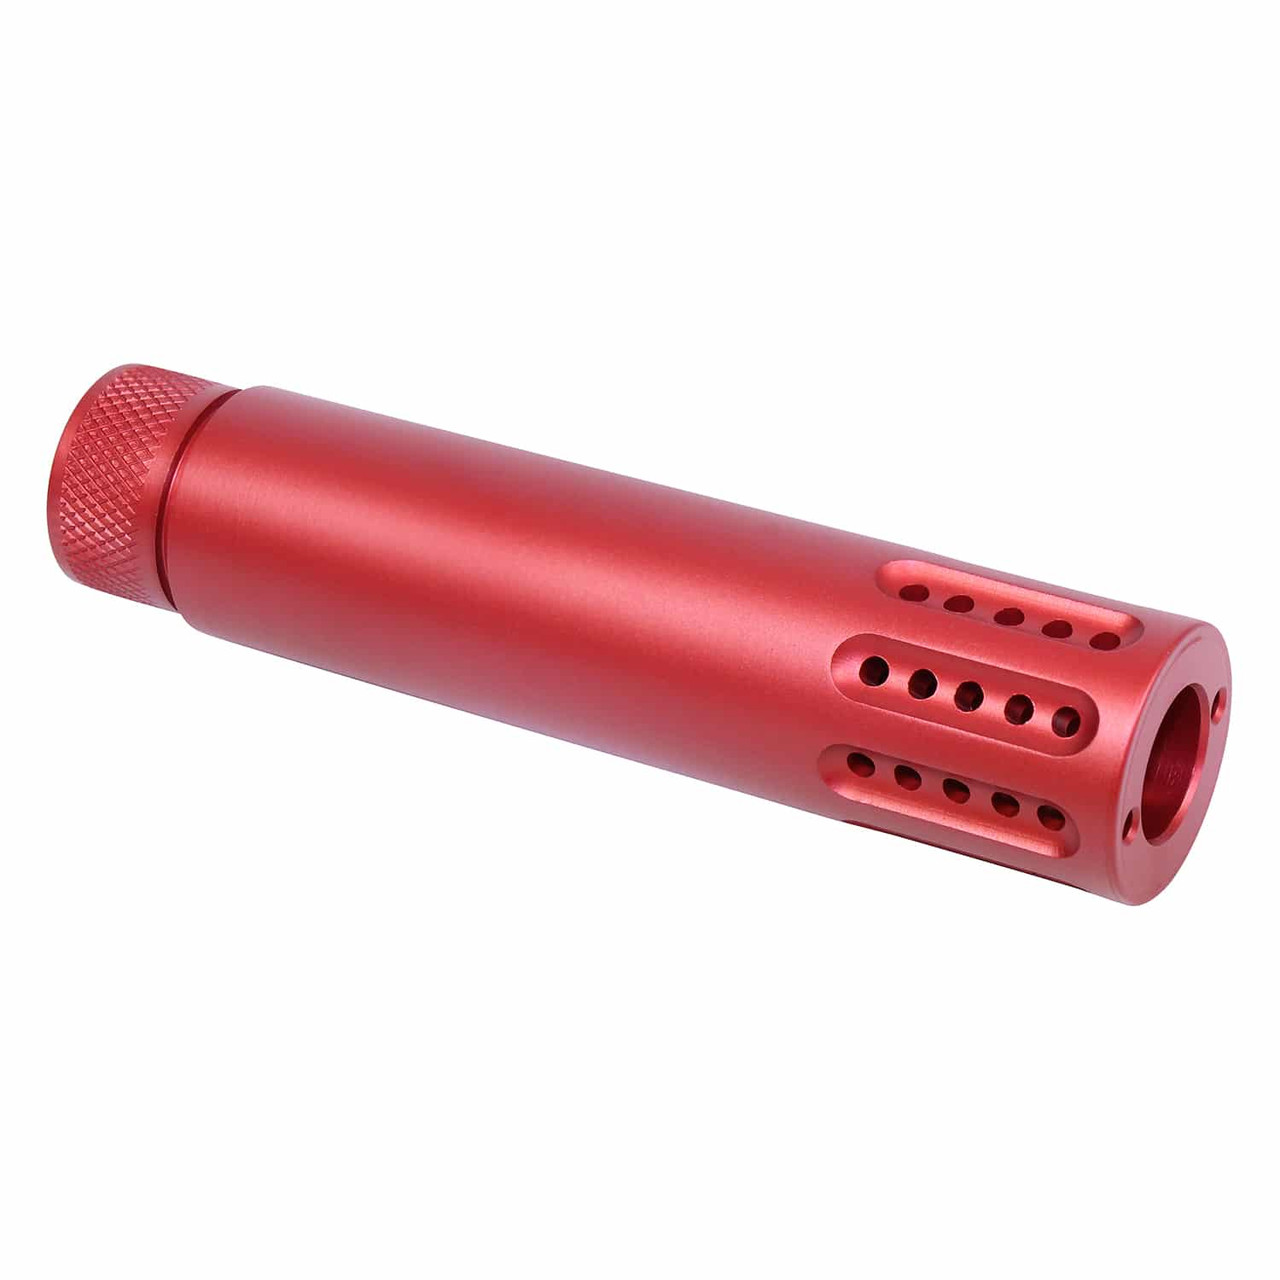 Guntec USA 1326-MB-P-308-RED Slip Over Barrel Shroud With Multi Port Muzzle Brake (.308 Cal) (Anodized Red)